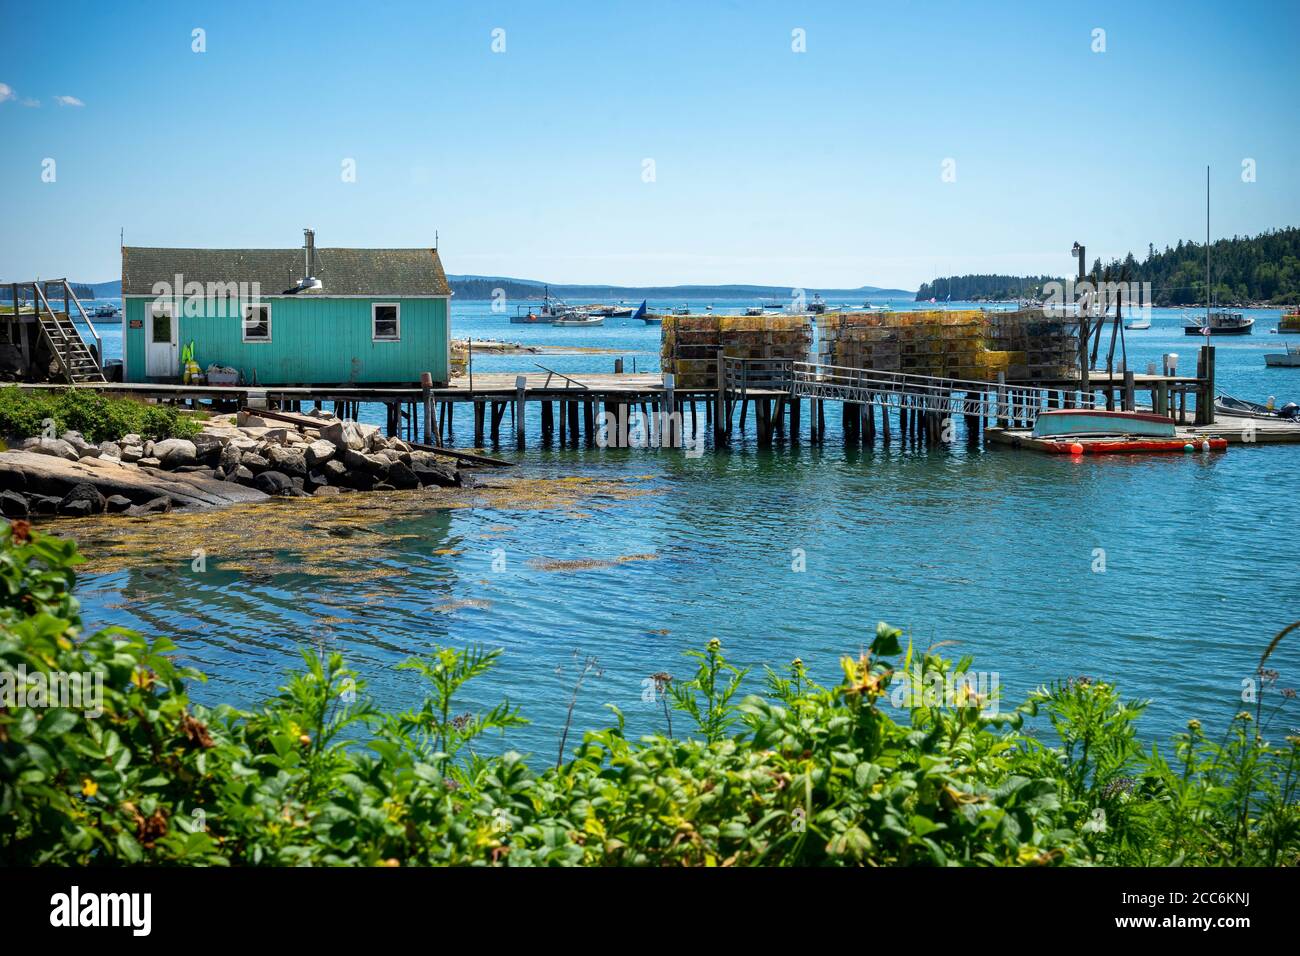 Dock and lobster traps in Stonington Maine Stock Photo